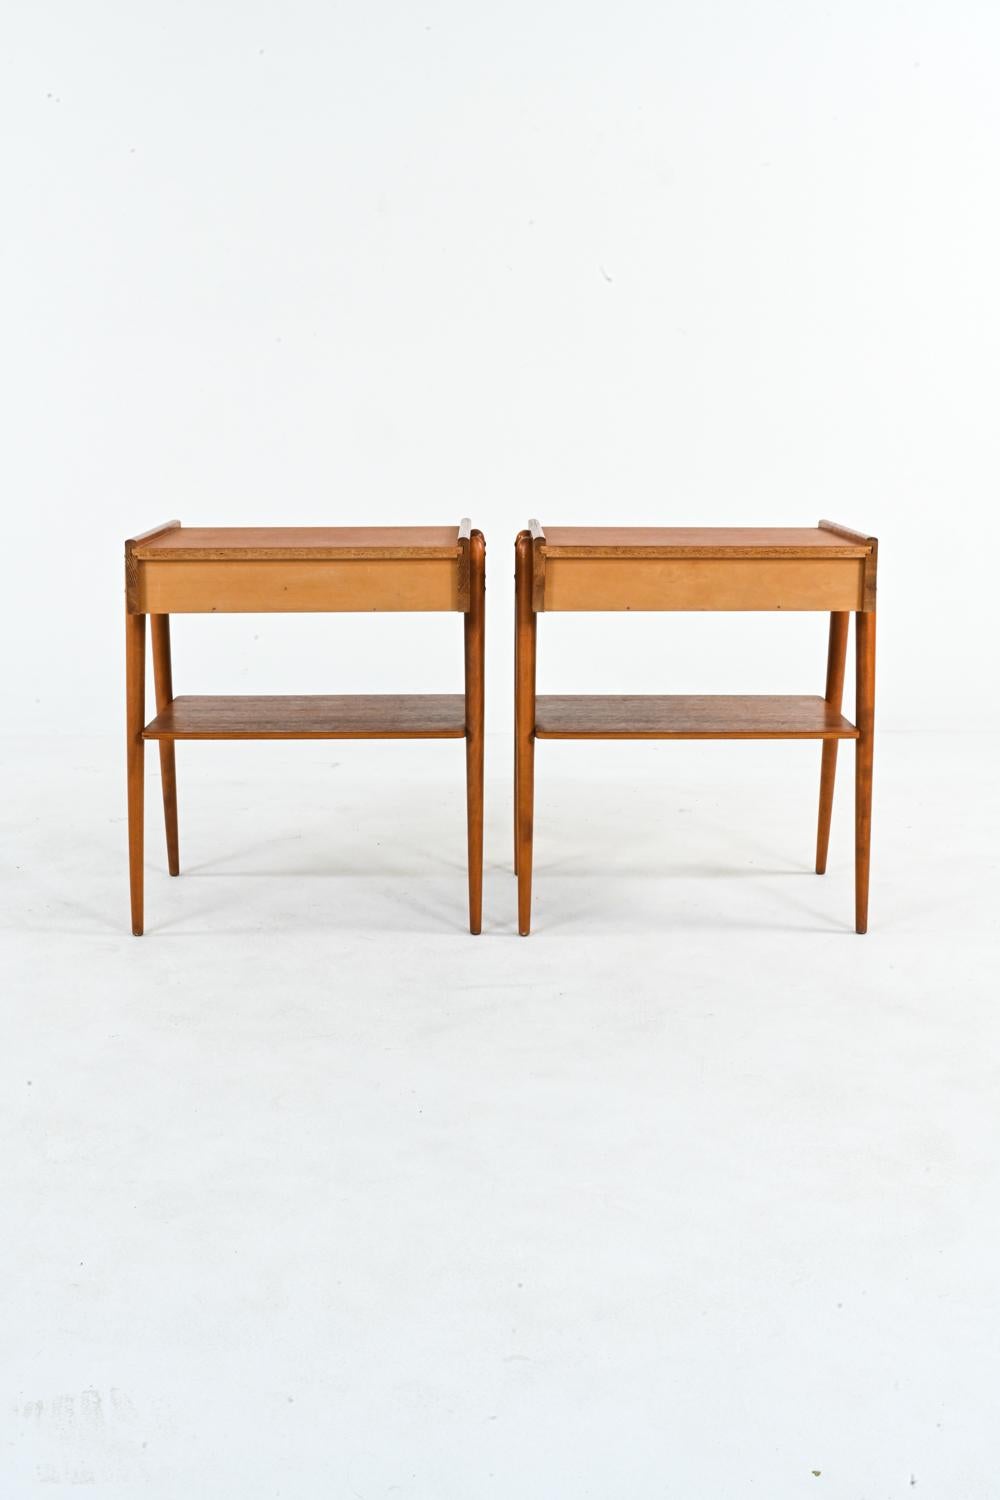 20th Century Pair of Swedish Mid-Century Teak Nightstands or End Tables by Carlstrom & Co.